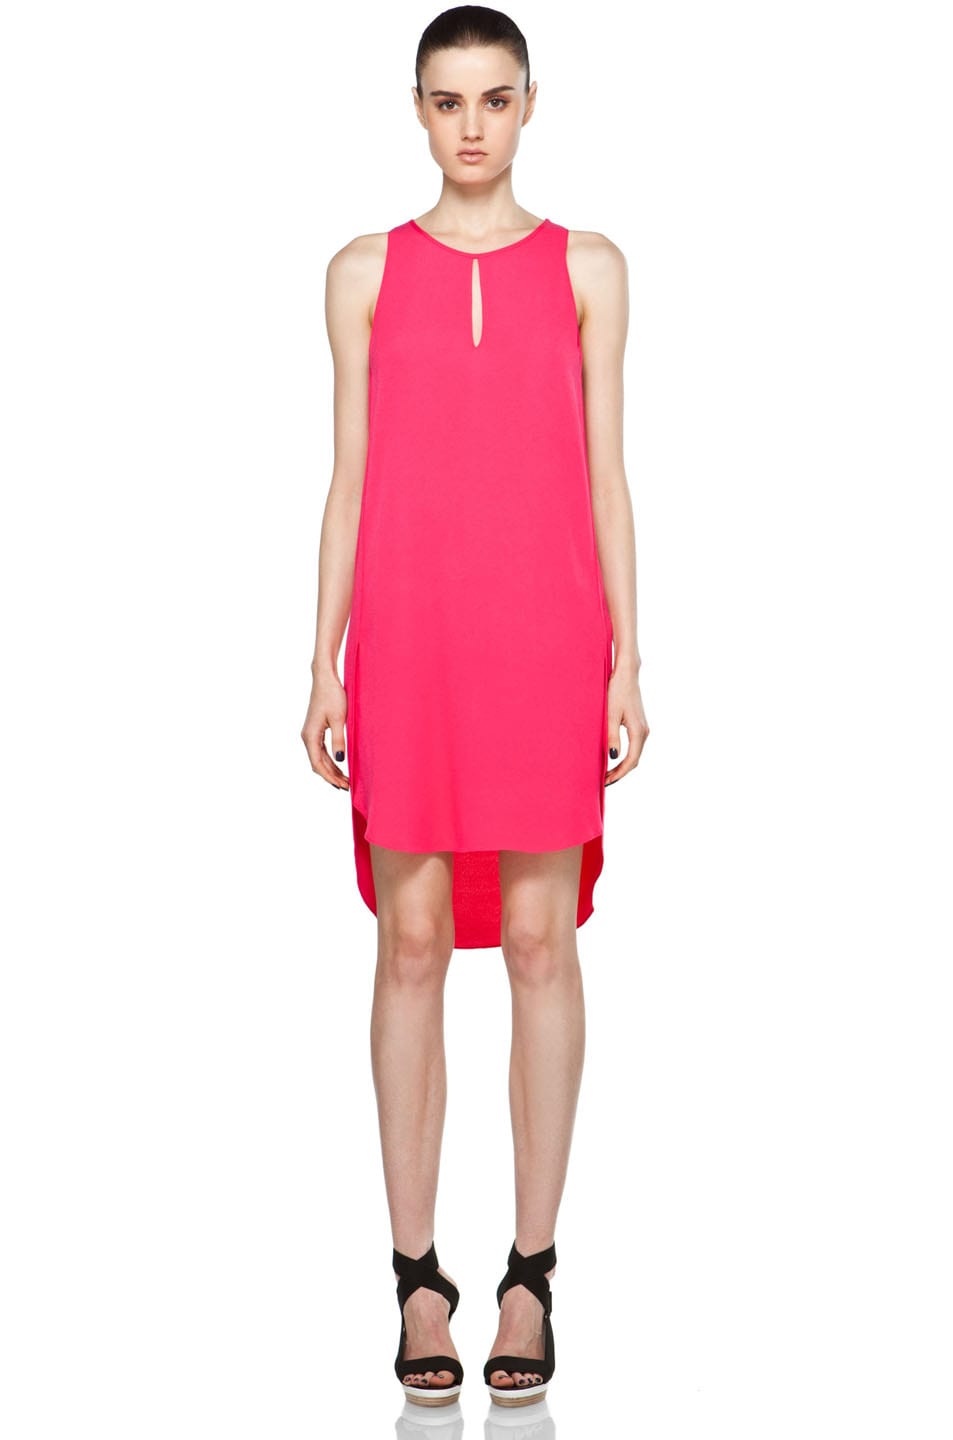 3.1 phillip lim Sleeveless Dress w/ Overlapped Side Seams in Hot Pink ...